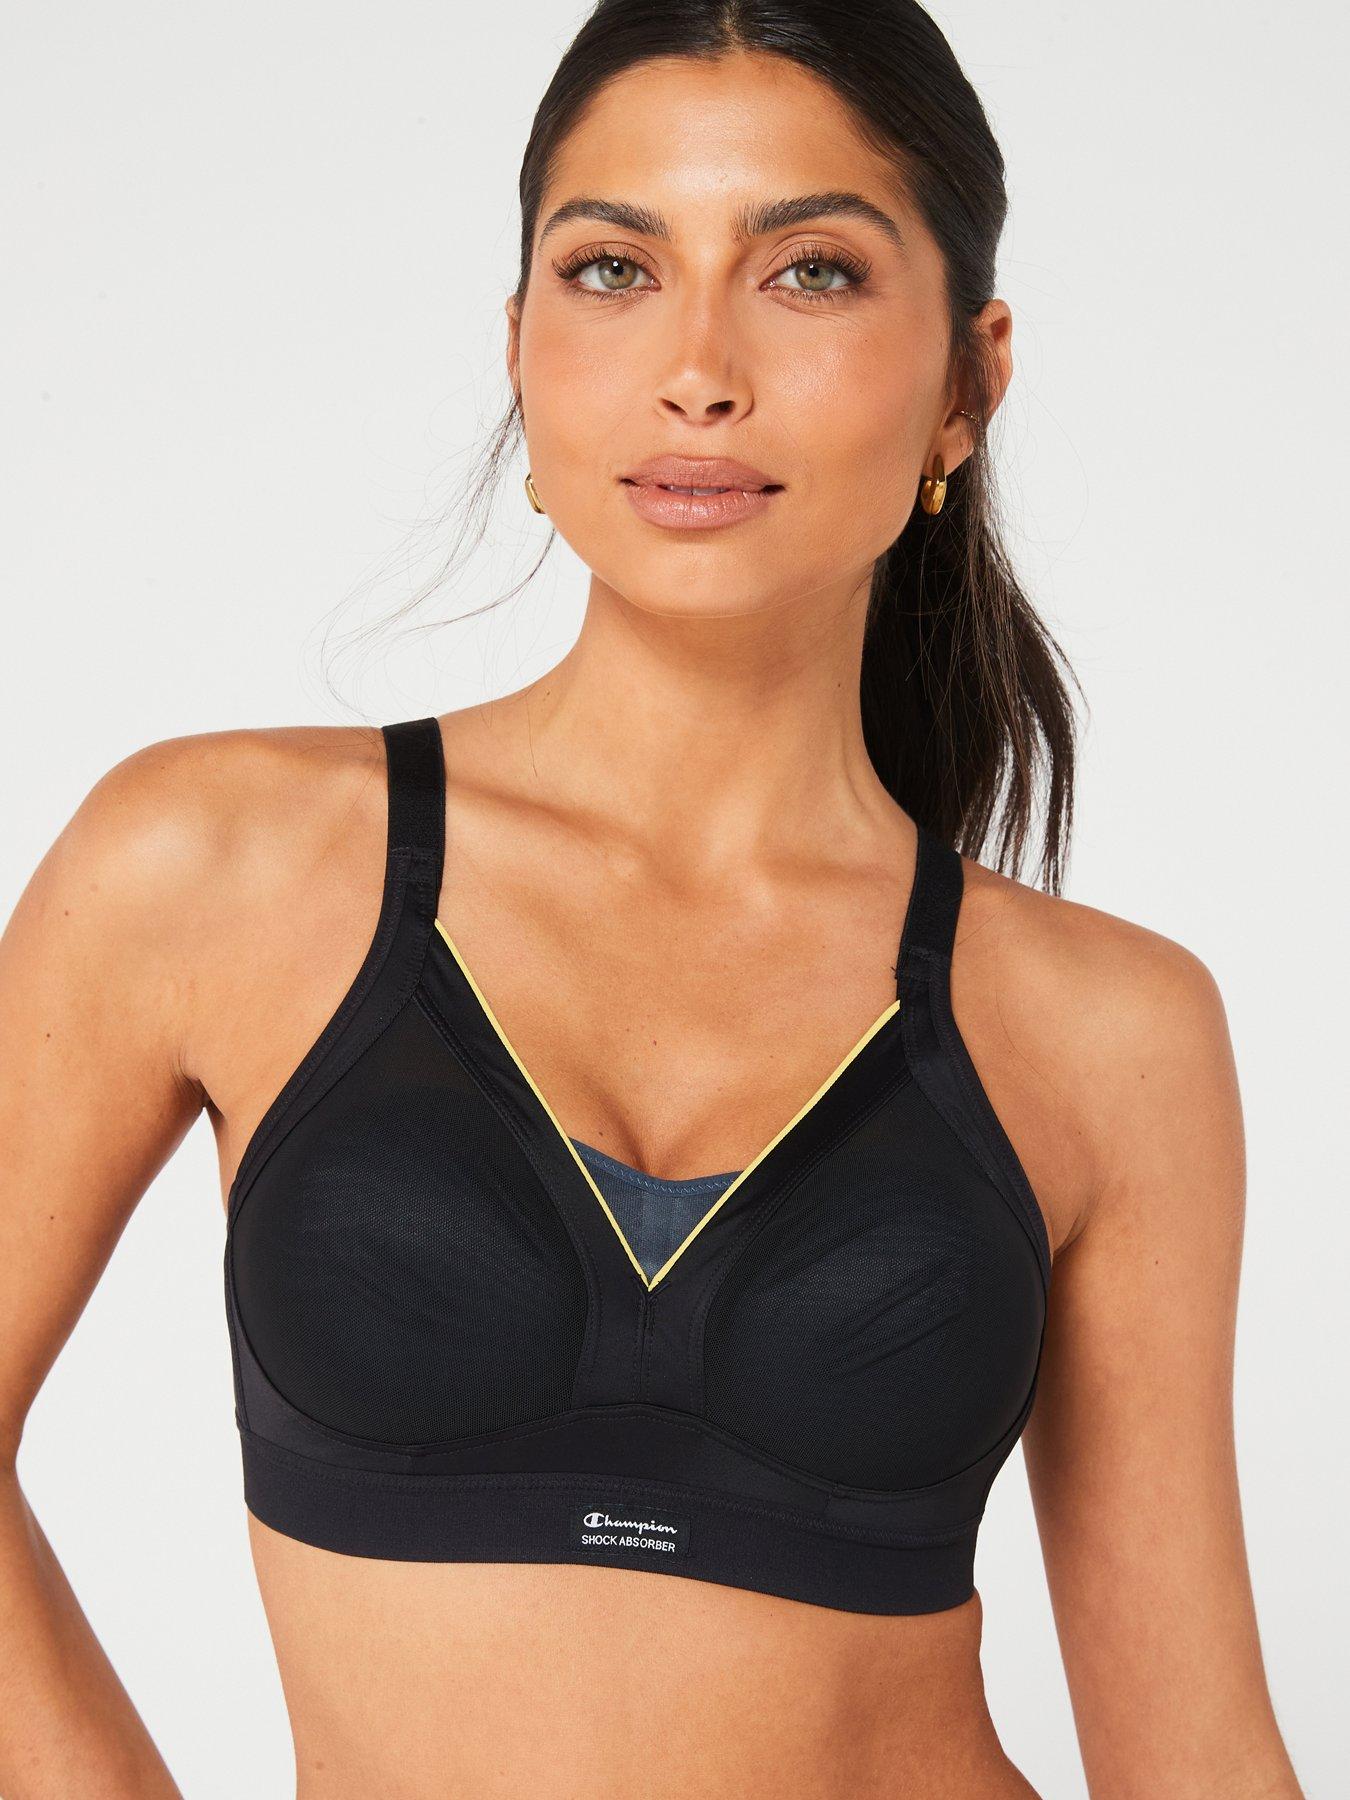 Time to Get Active! – Shock Absorber “Multi Sports Support Bra” in